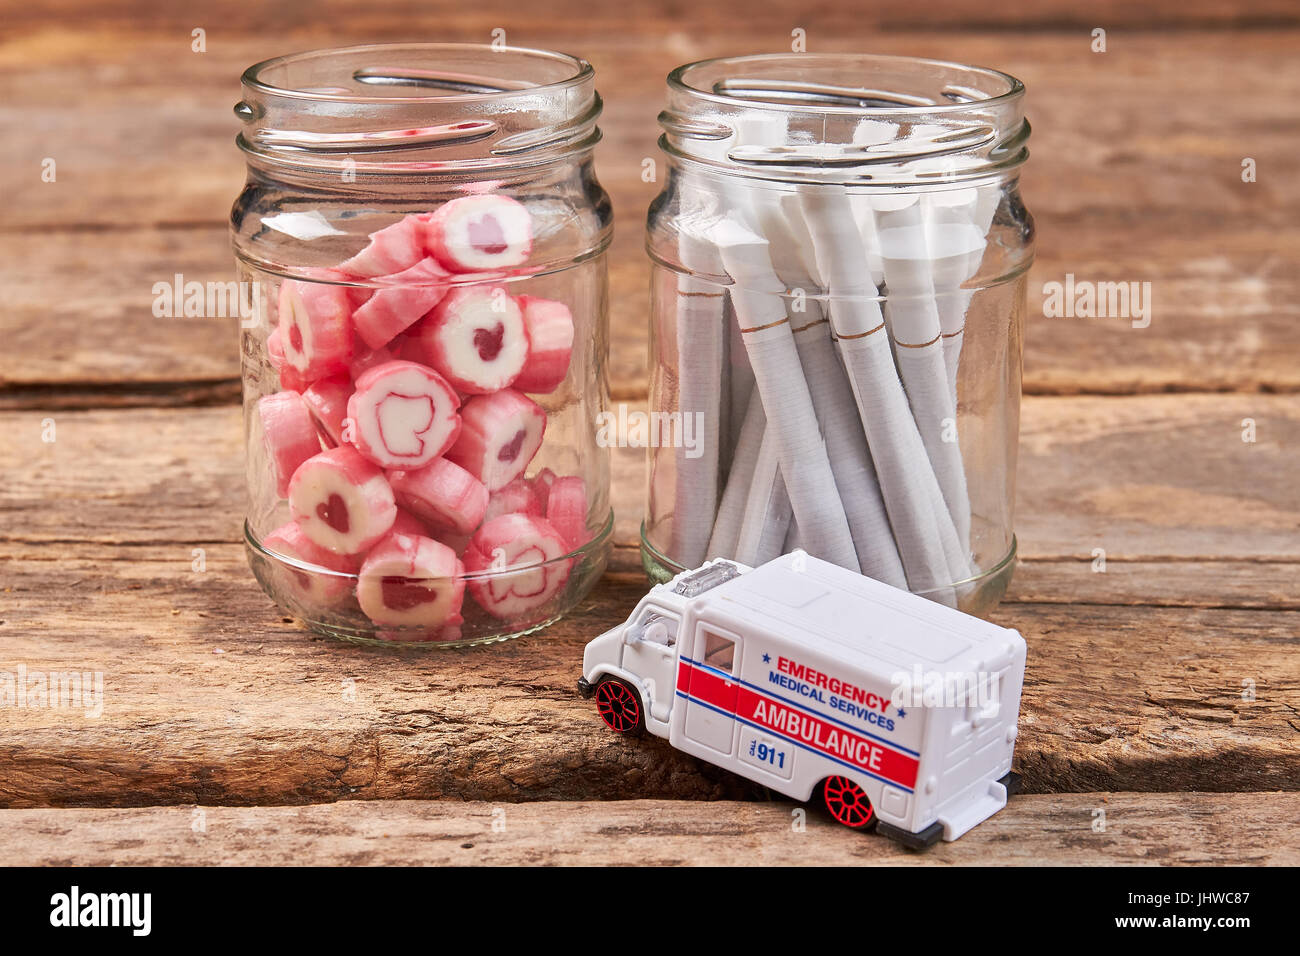 Jars with sweets and cigarettes, ambulance. Stock Photo